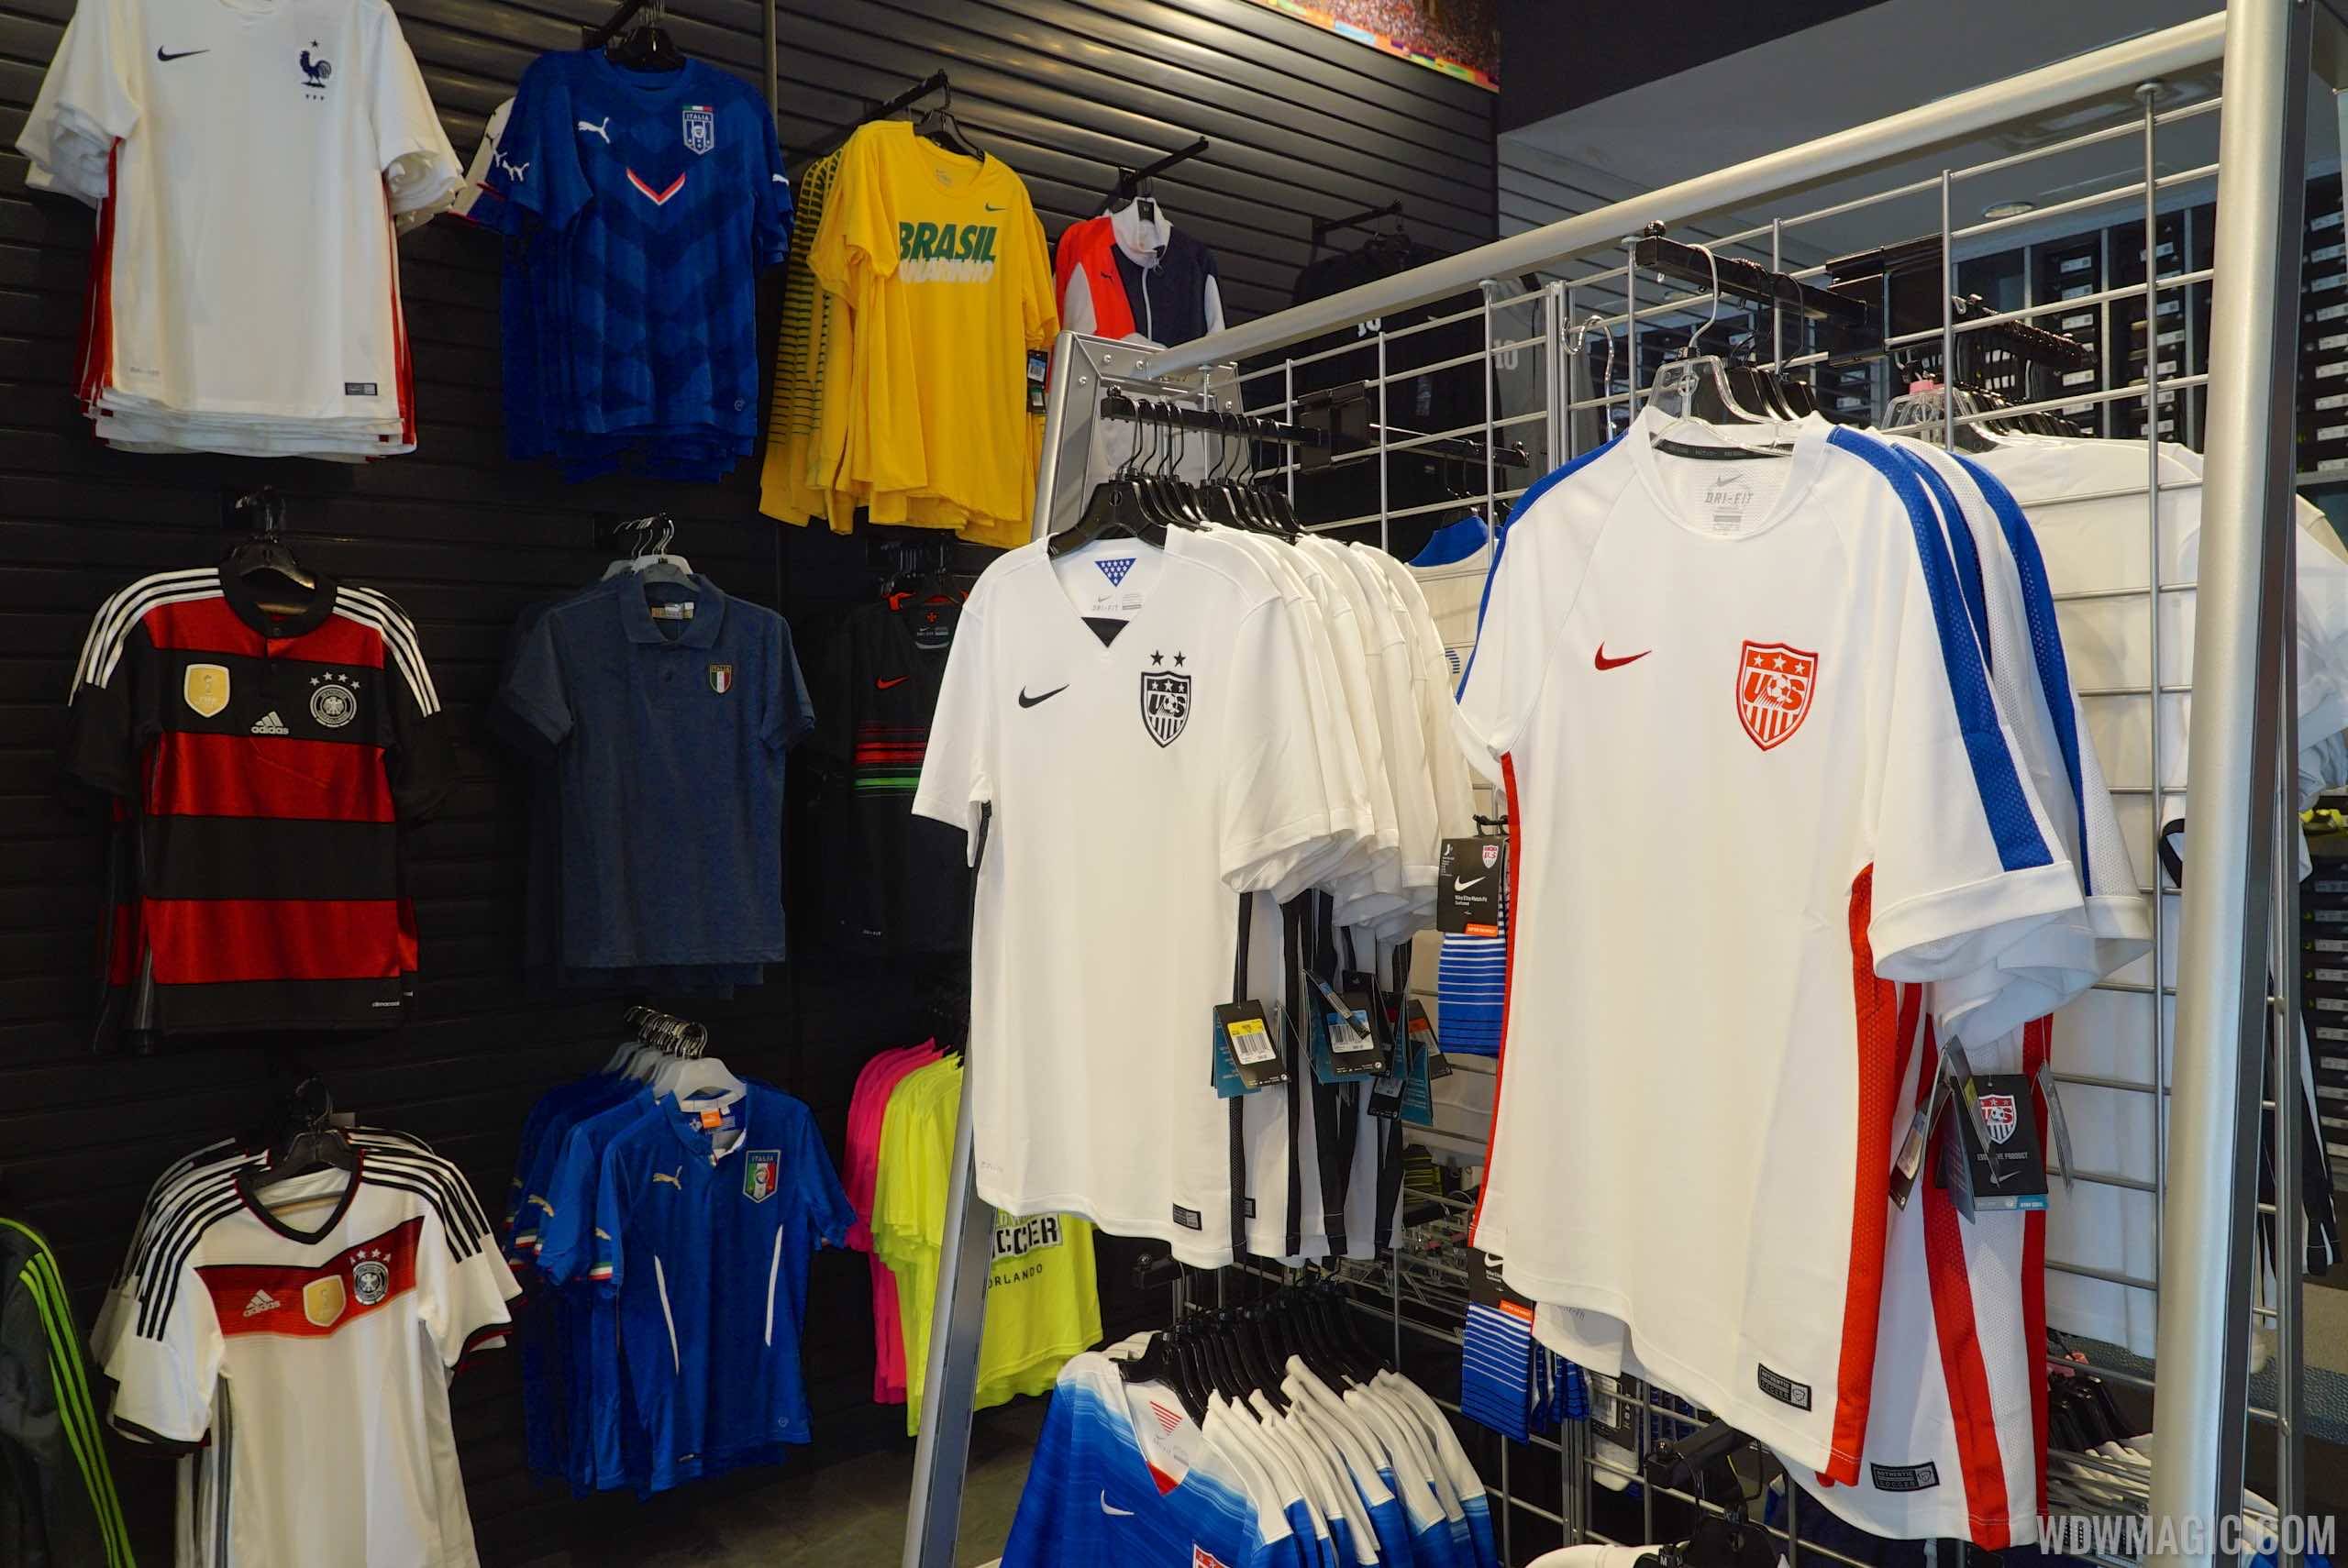 Downtown Disney's United World Soccer Shop closing to be replaced with a Disney operated Marvel store